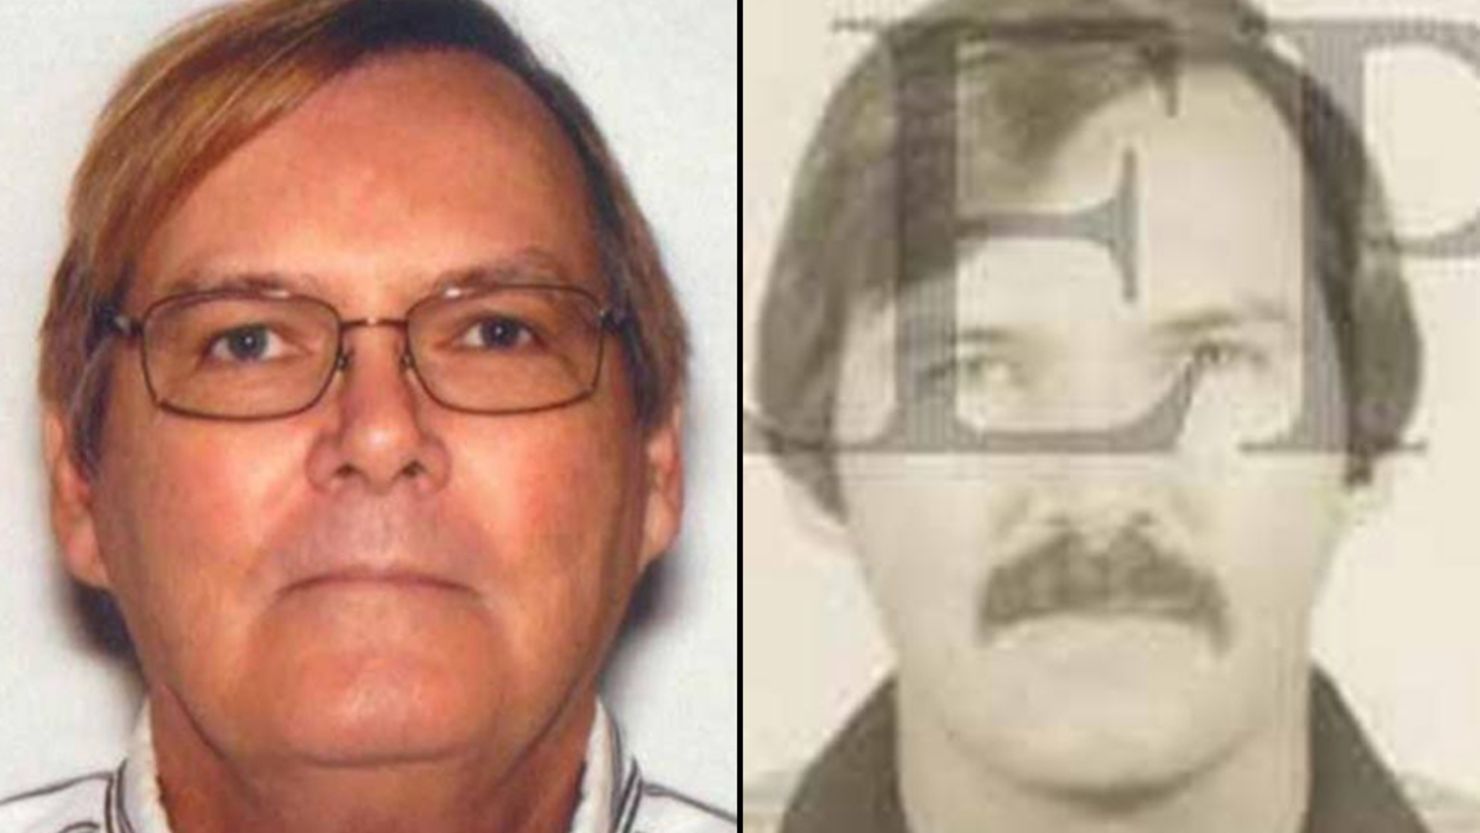 Images provided by the FBI show William James Vahey in 2013 (left) and in 1986.